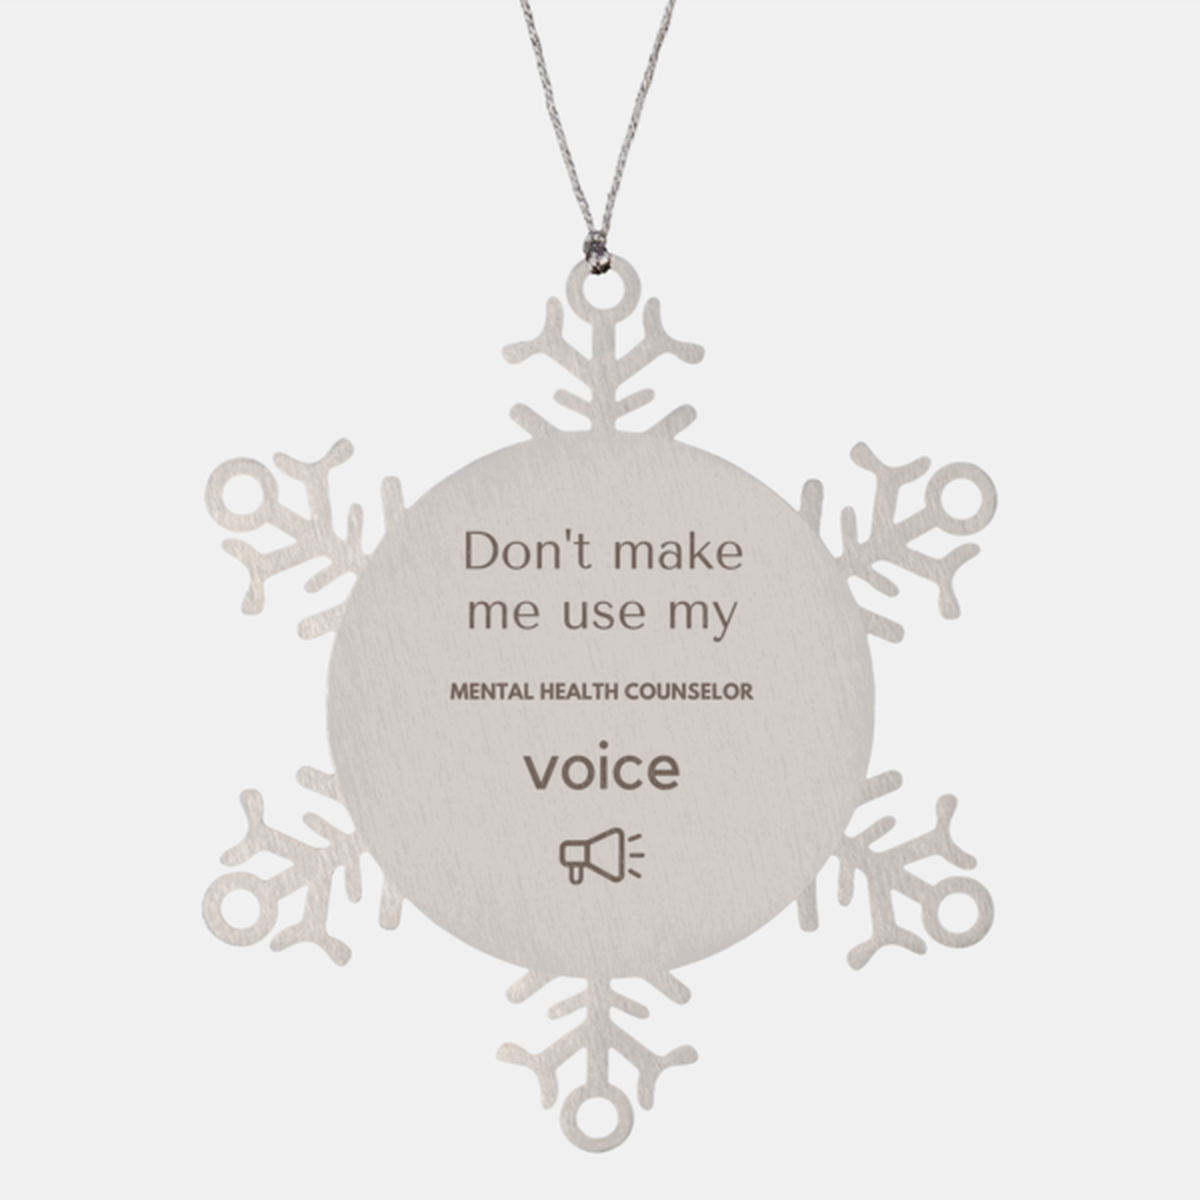 Don't make me use my Mental Health Counselor voice, Sarcasm Mental Health Counselor Ornament Gifts, Christmas Mental Health Counselor Snowflake Ornament Unique Gifts For Mental Health Counselor Coworkers, Men, Women, Colleague, Friends